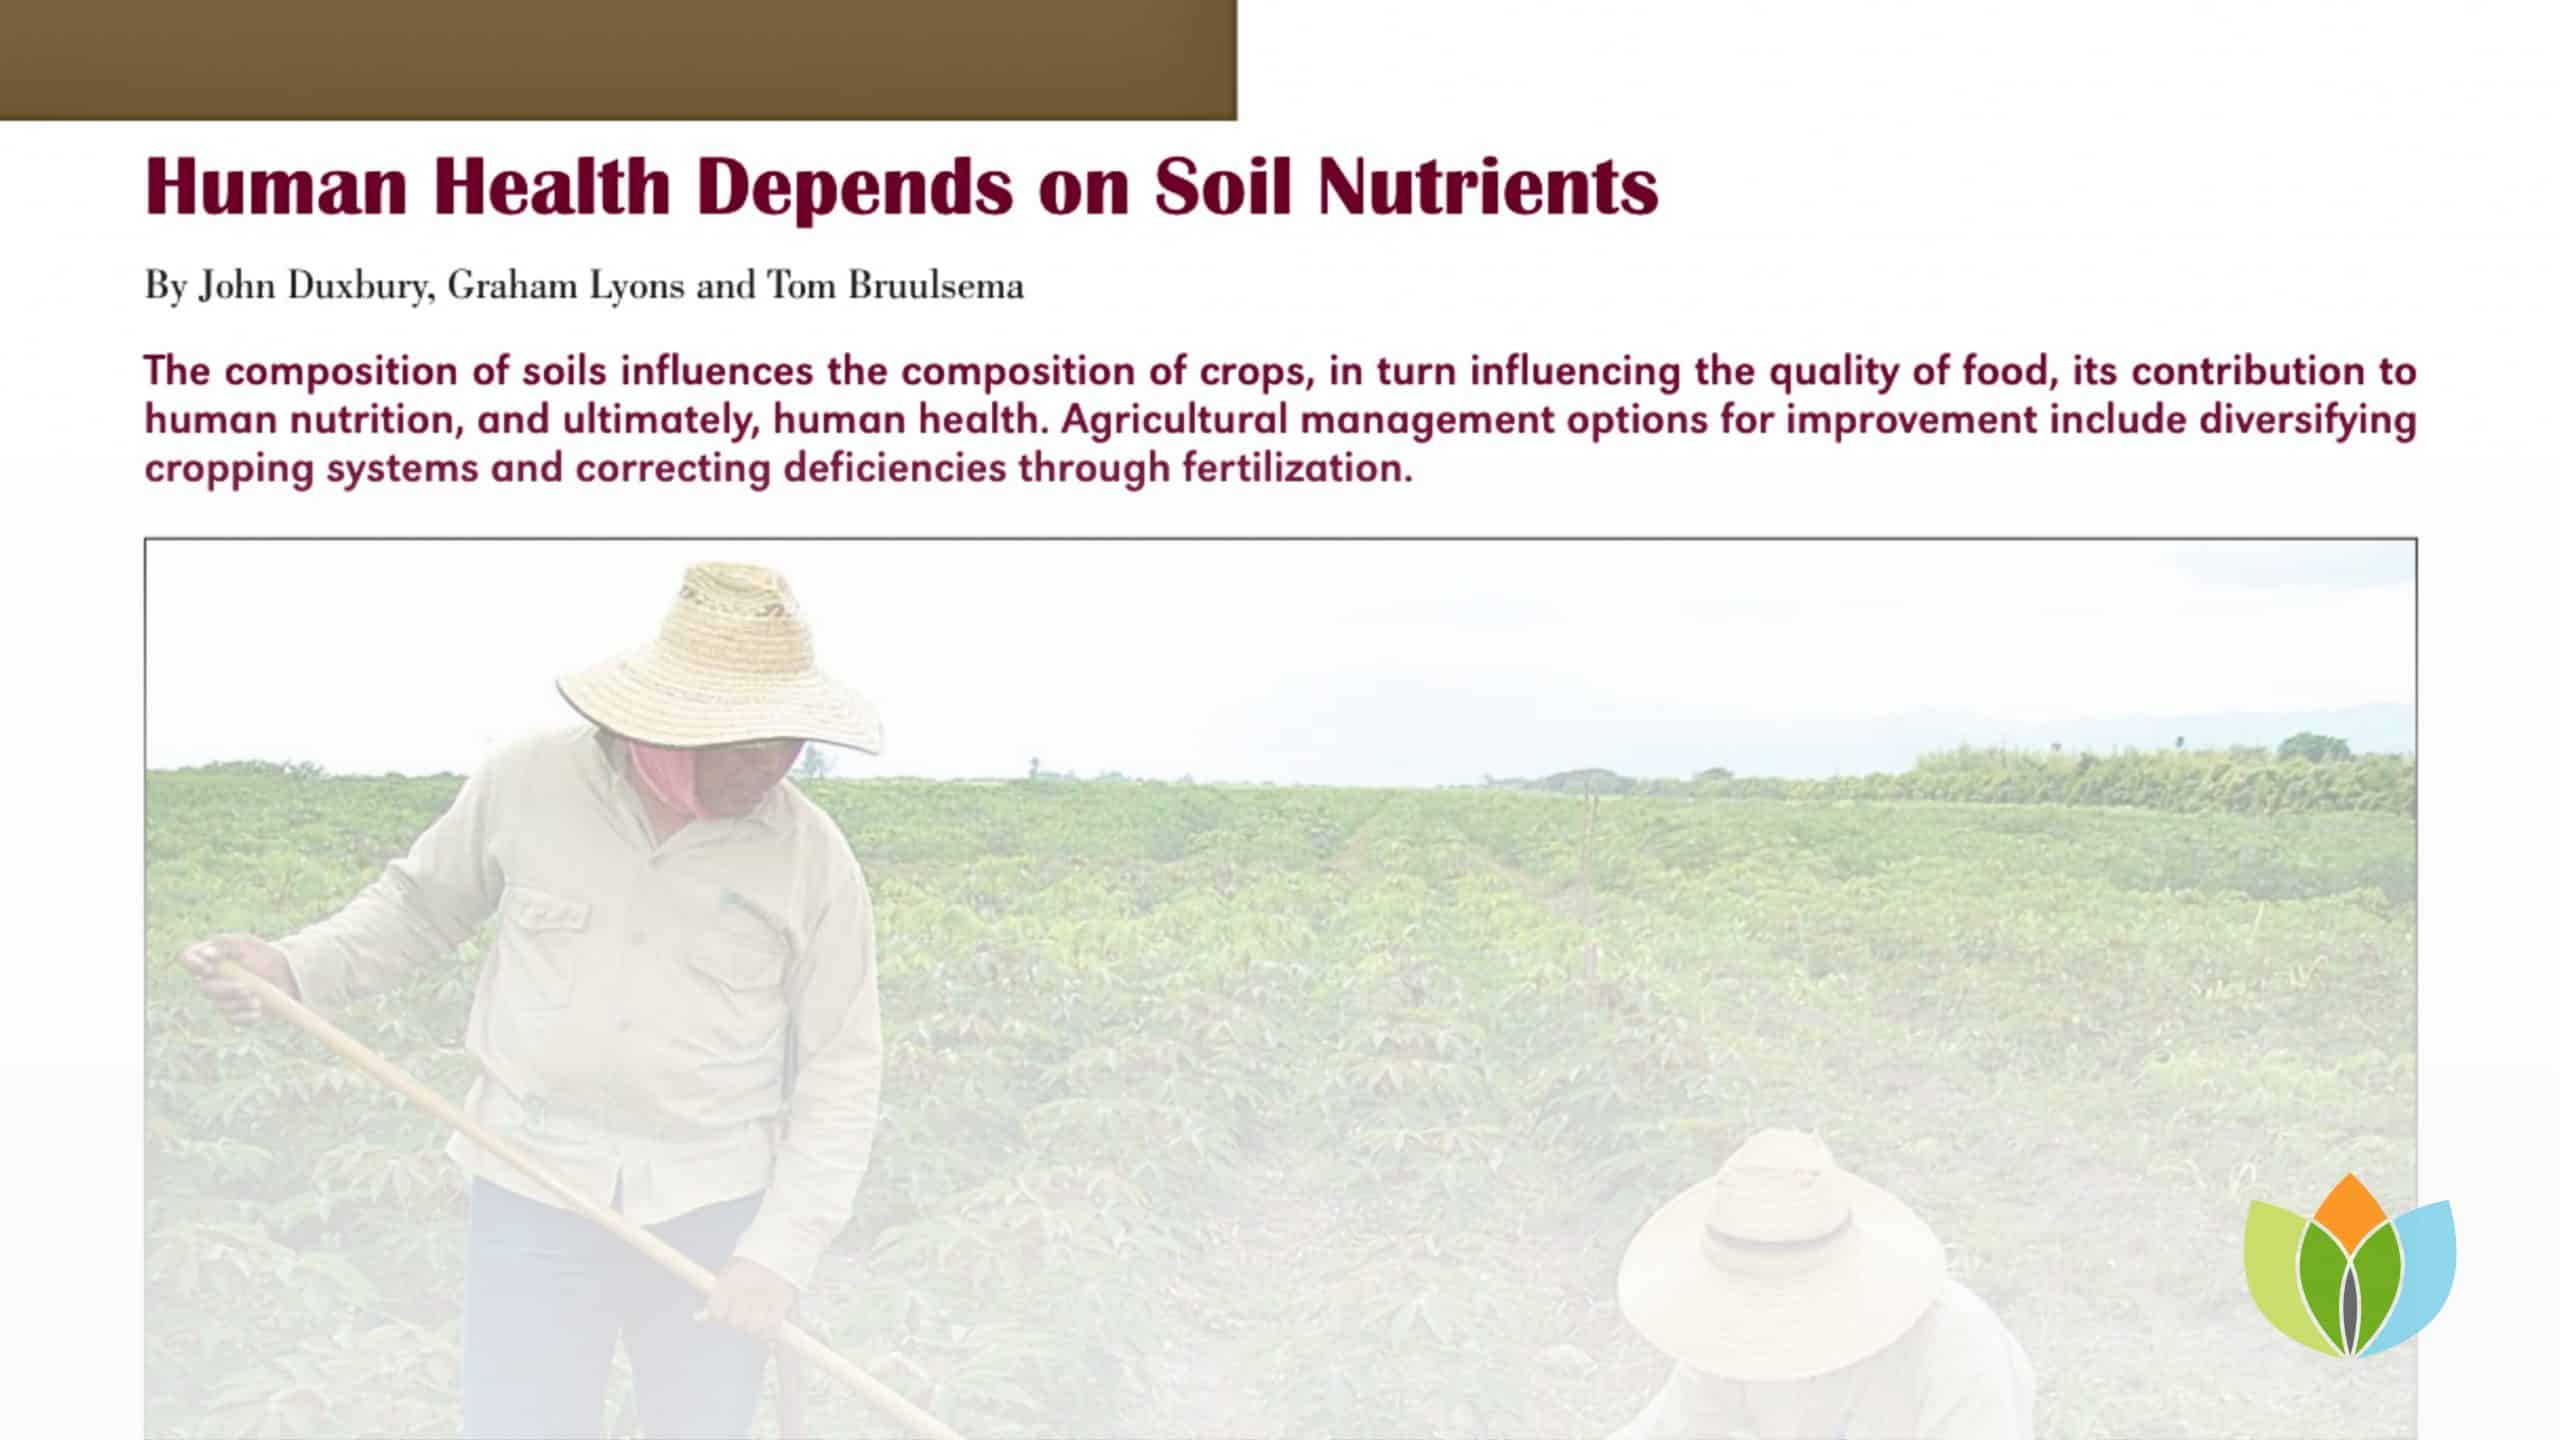 Human Health Depends on Soil Nutrients